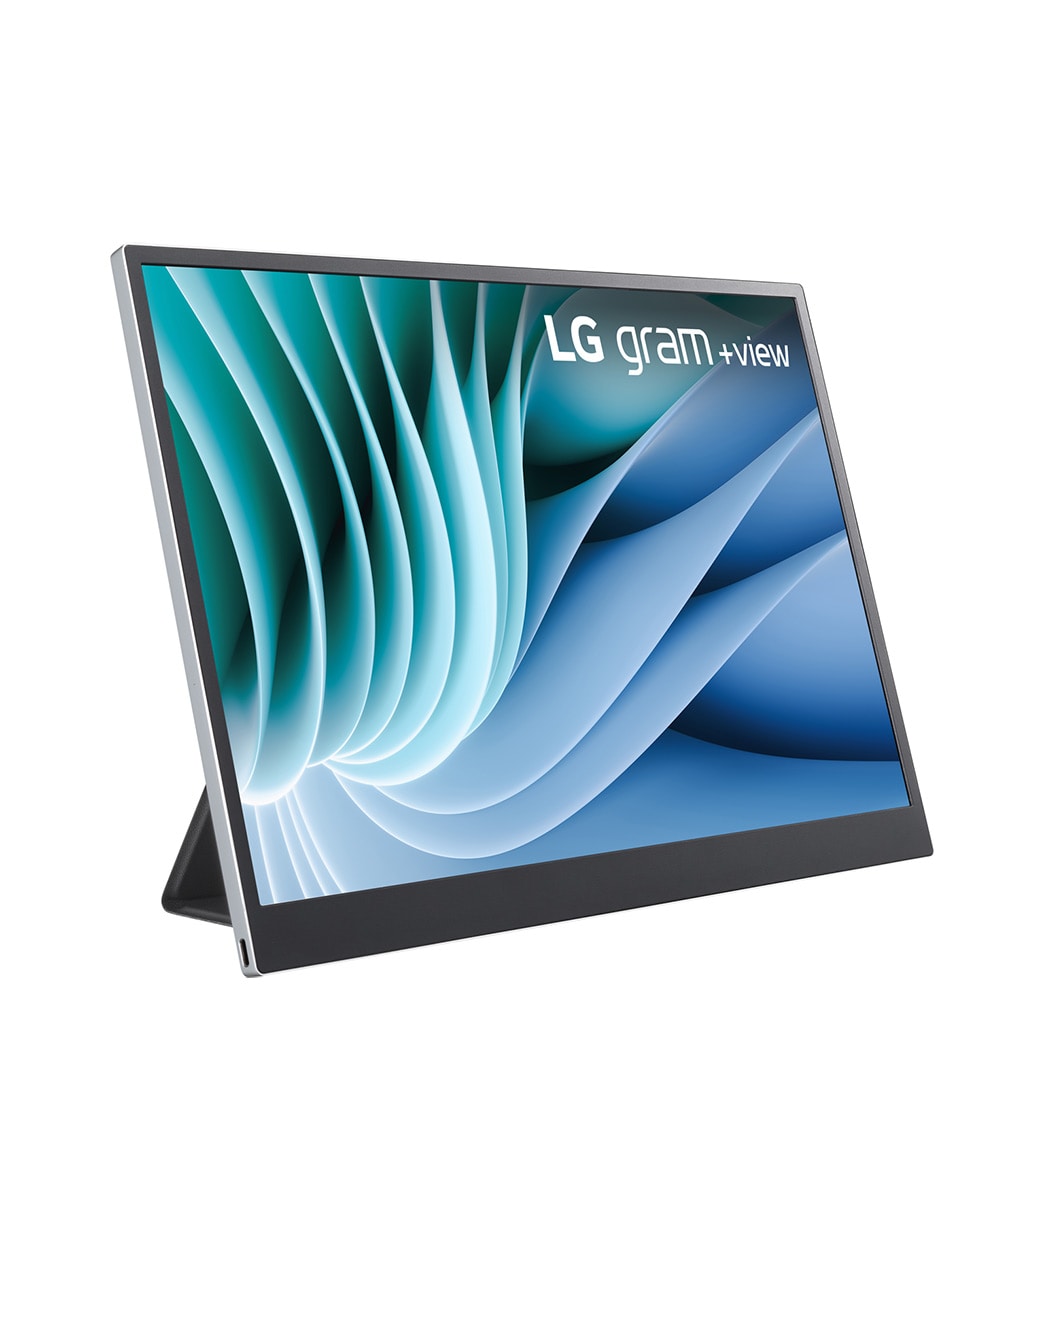 LG 16MR70: 16-inch +view for LG gram Portable Monitor with USB 